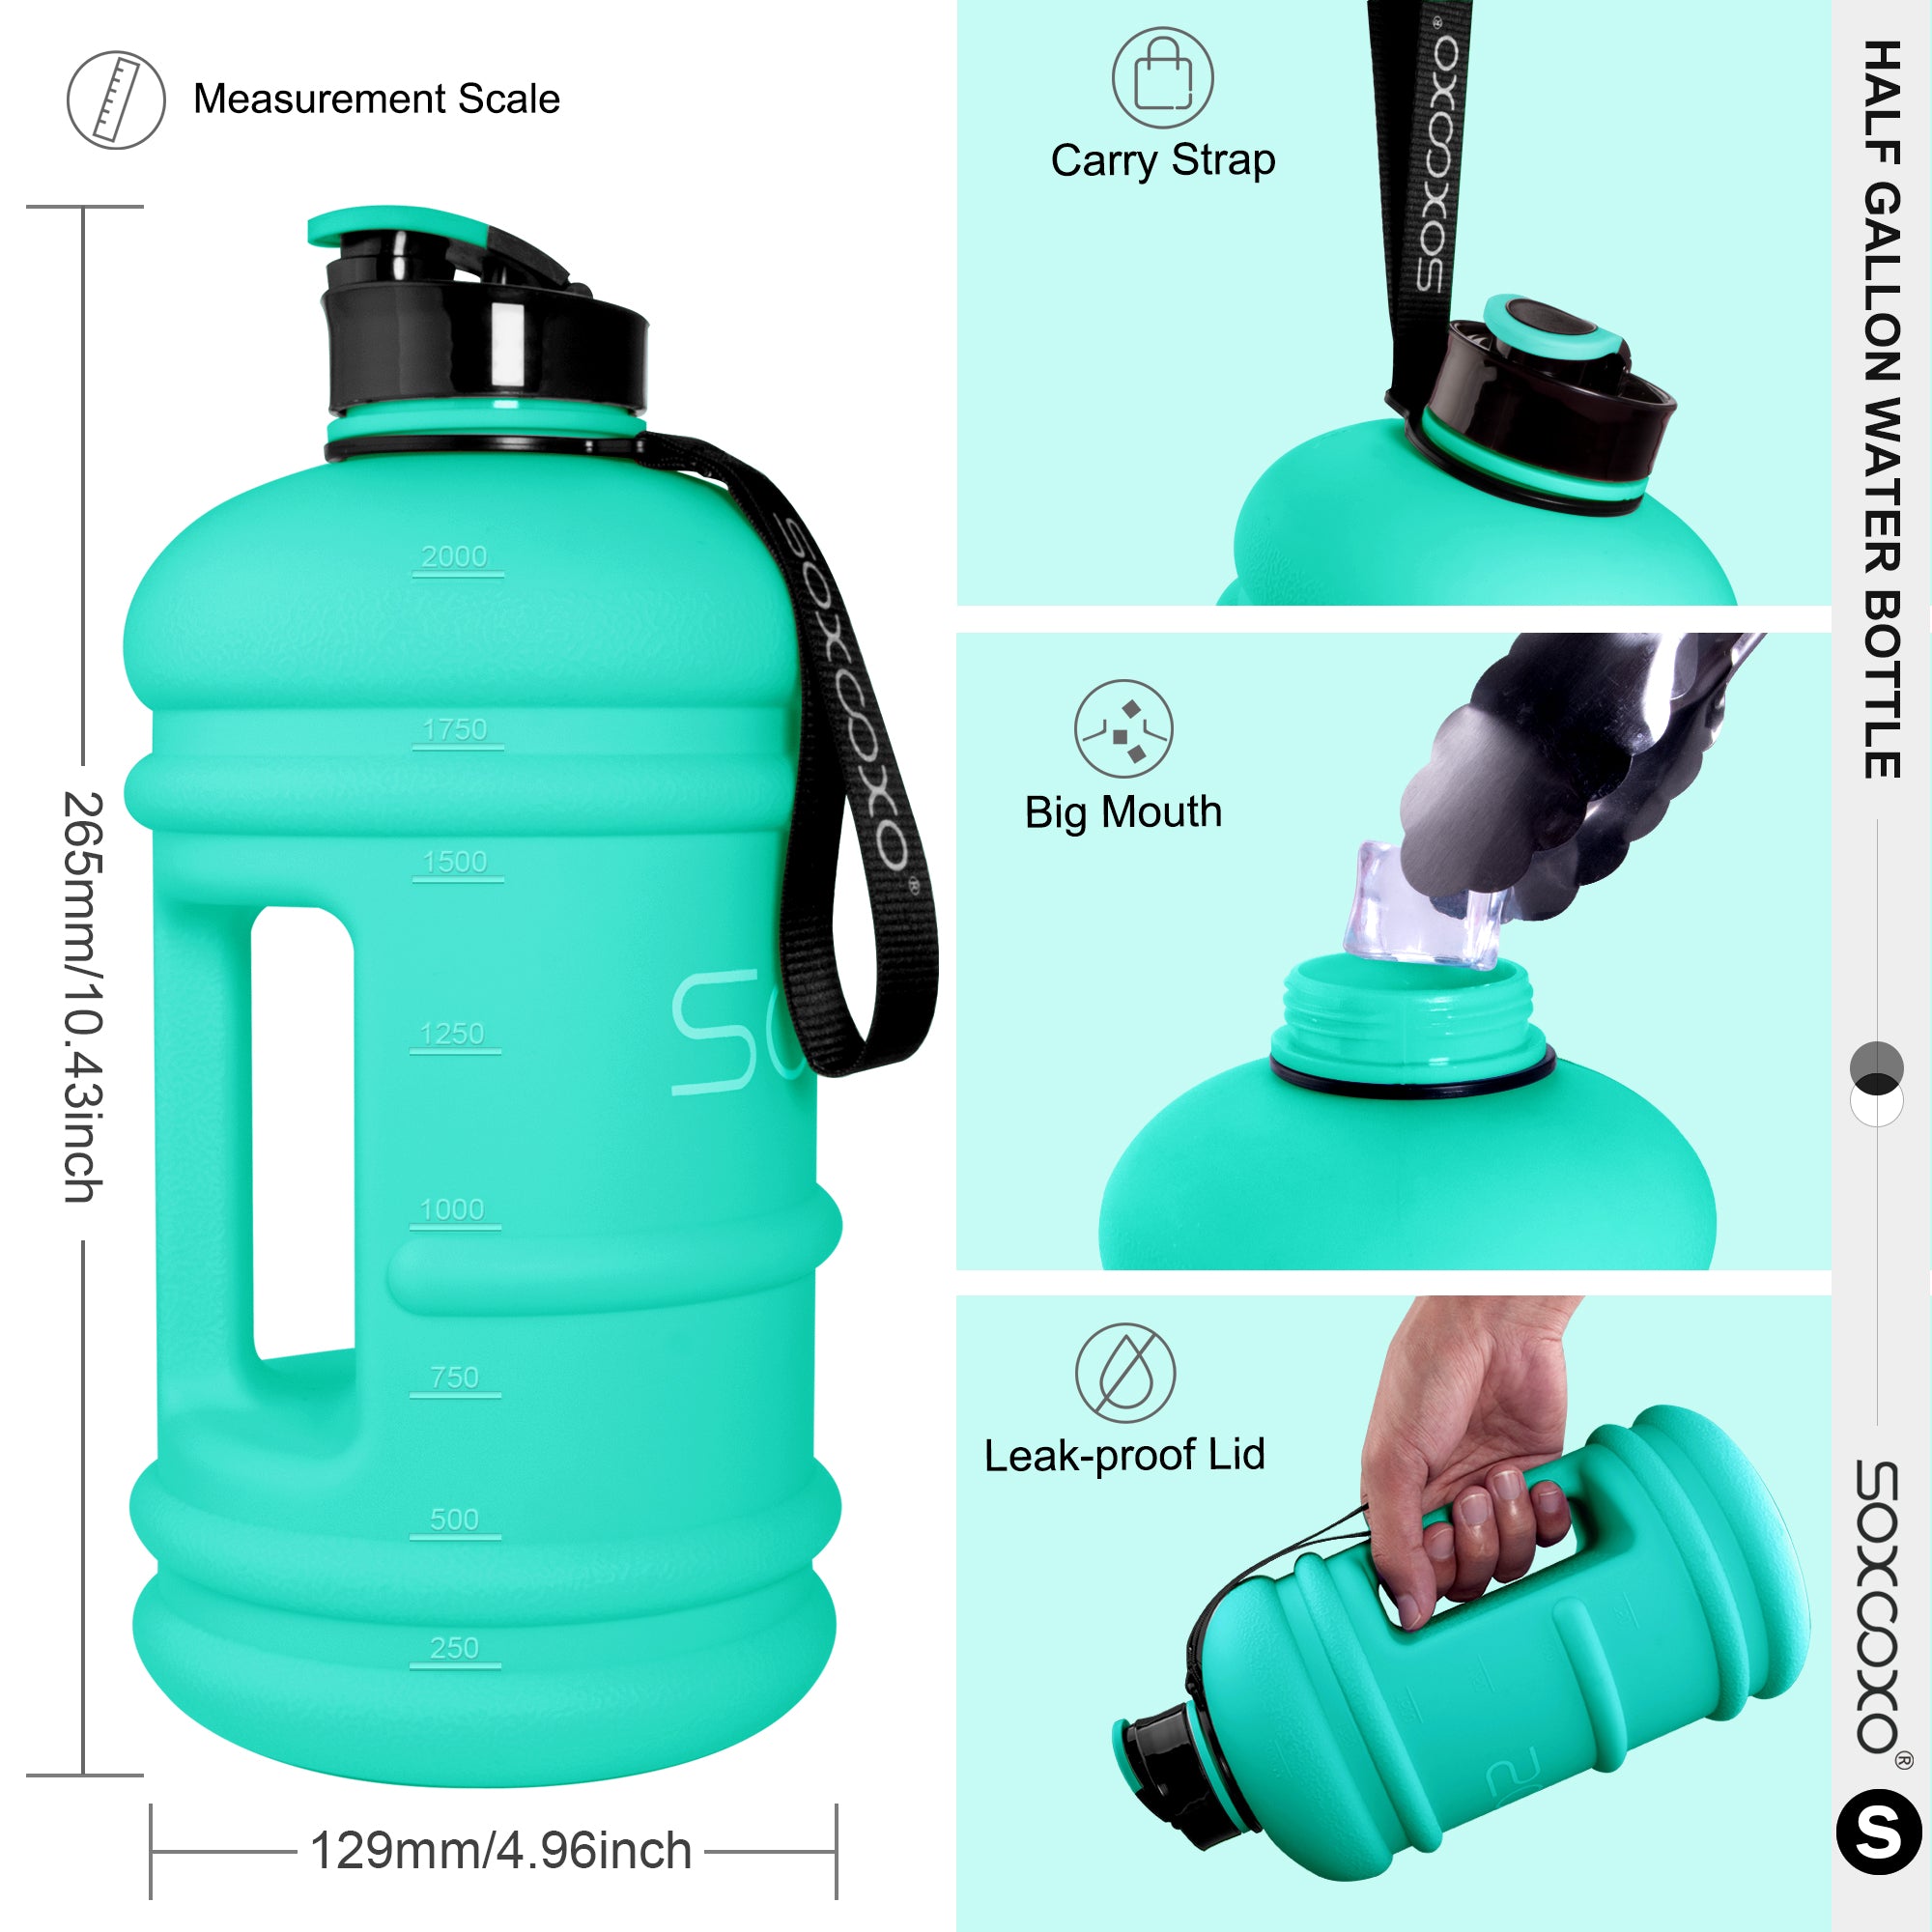 Plastic Bpa-Free 2.2 L Water Bottle with Straw Leakproof and Handle